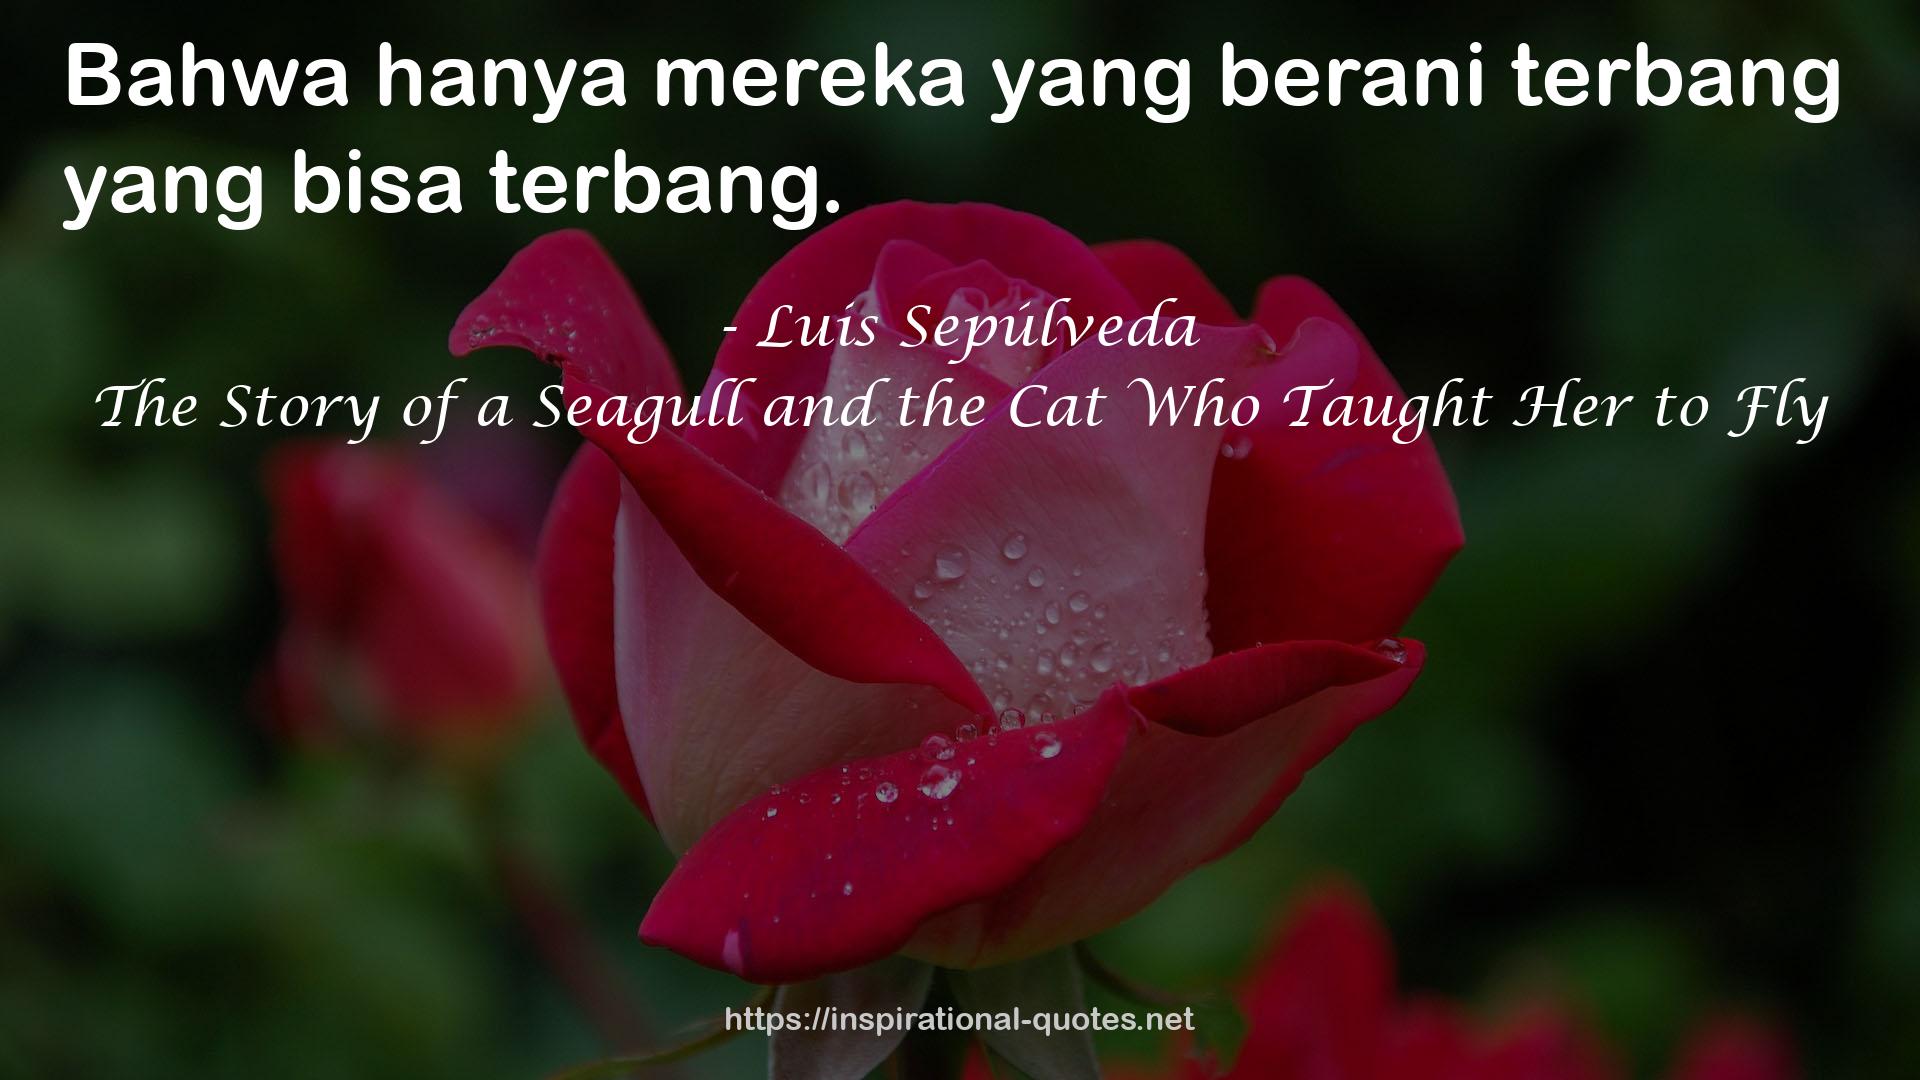 The Story of a Seagull and the Cat Who Taught Her to Fly QUOTES